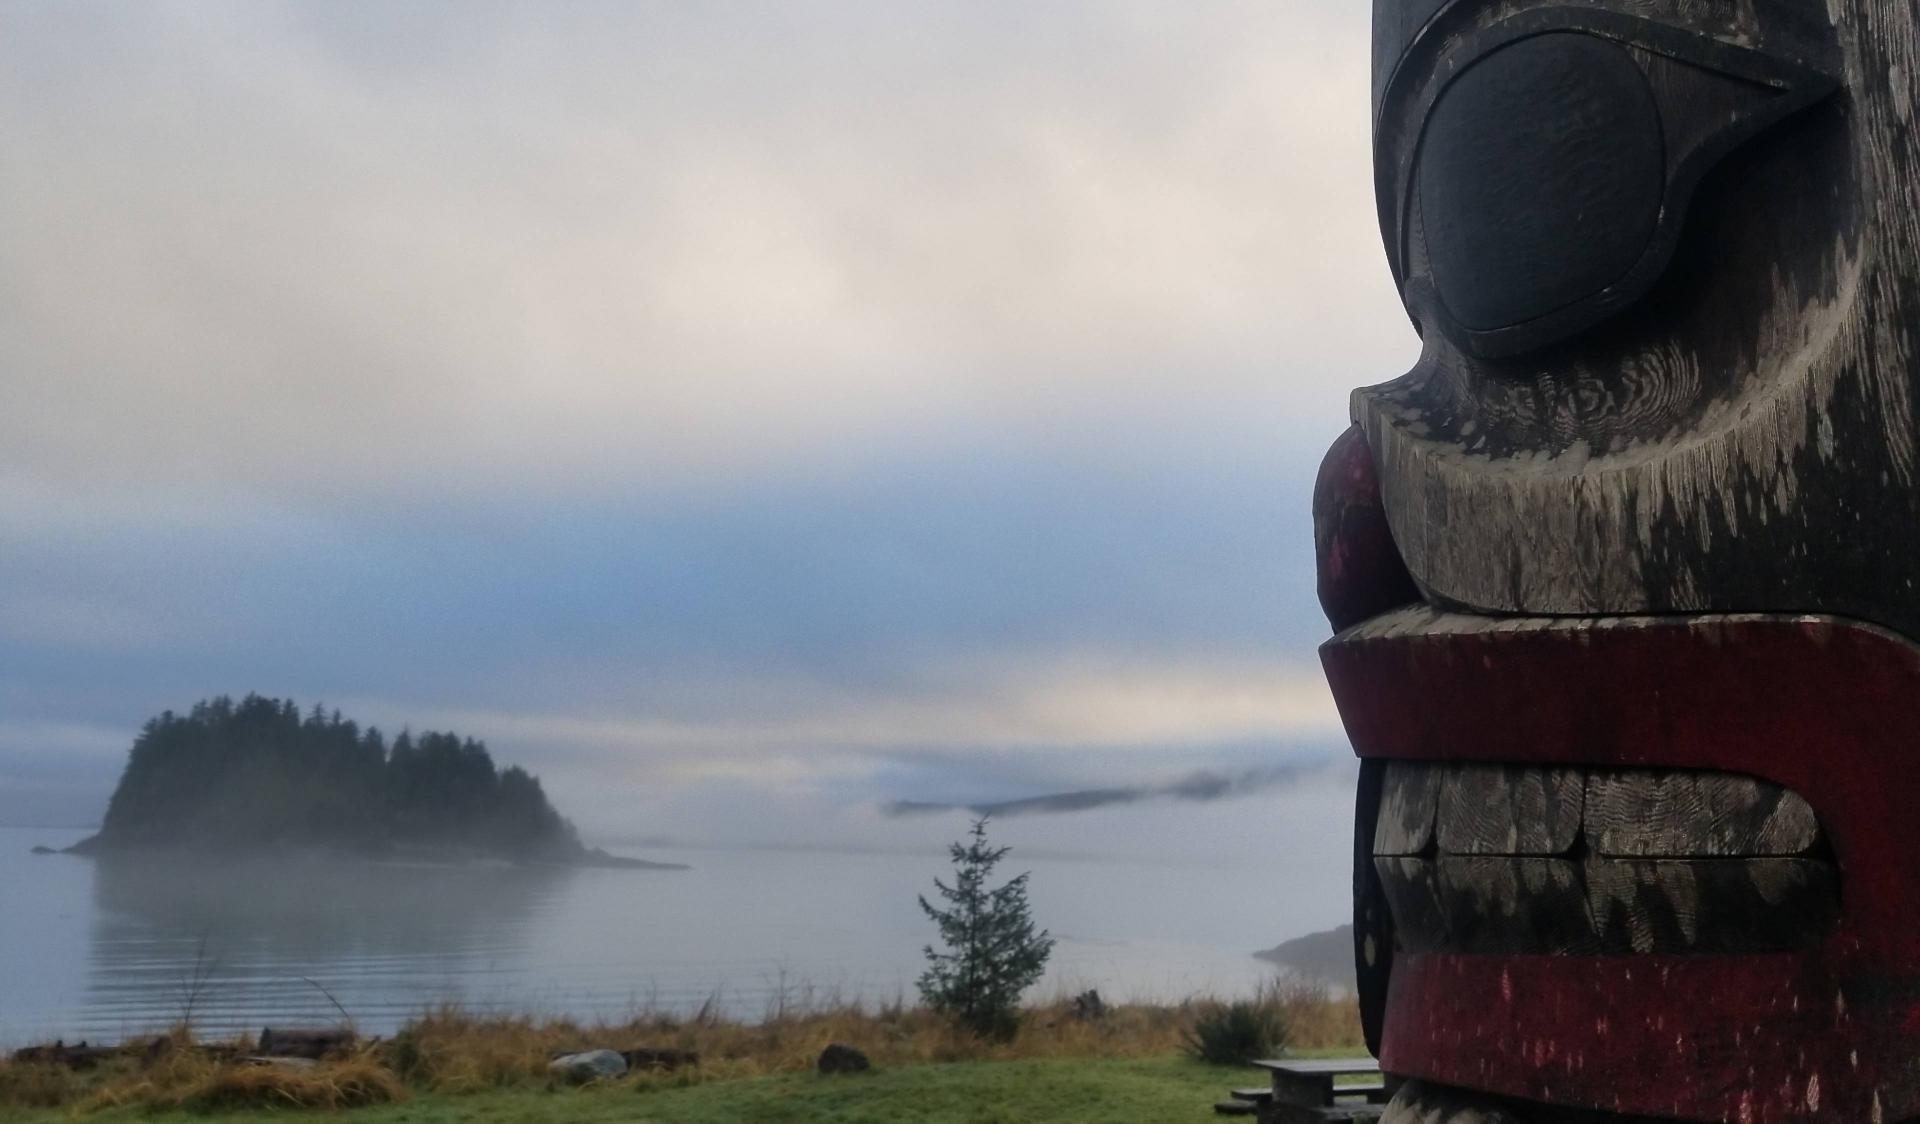 Photography of a totem pole in a foggy landscape with lake